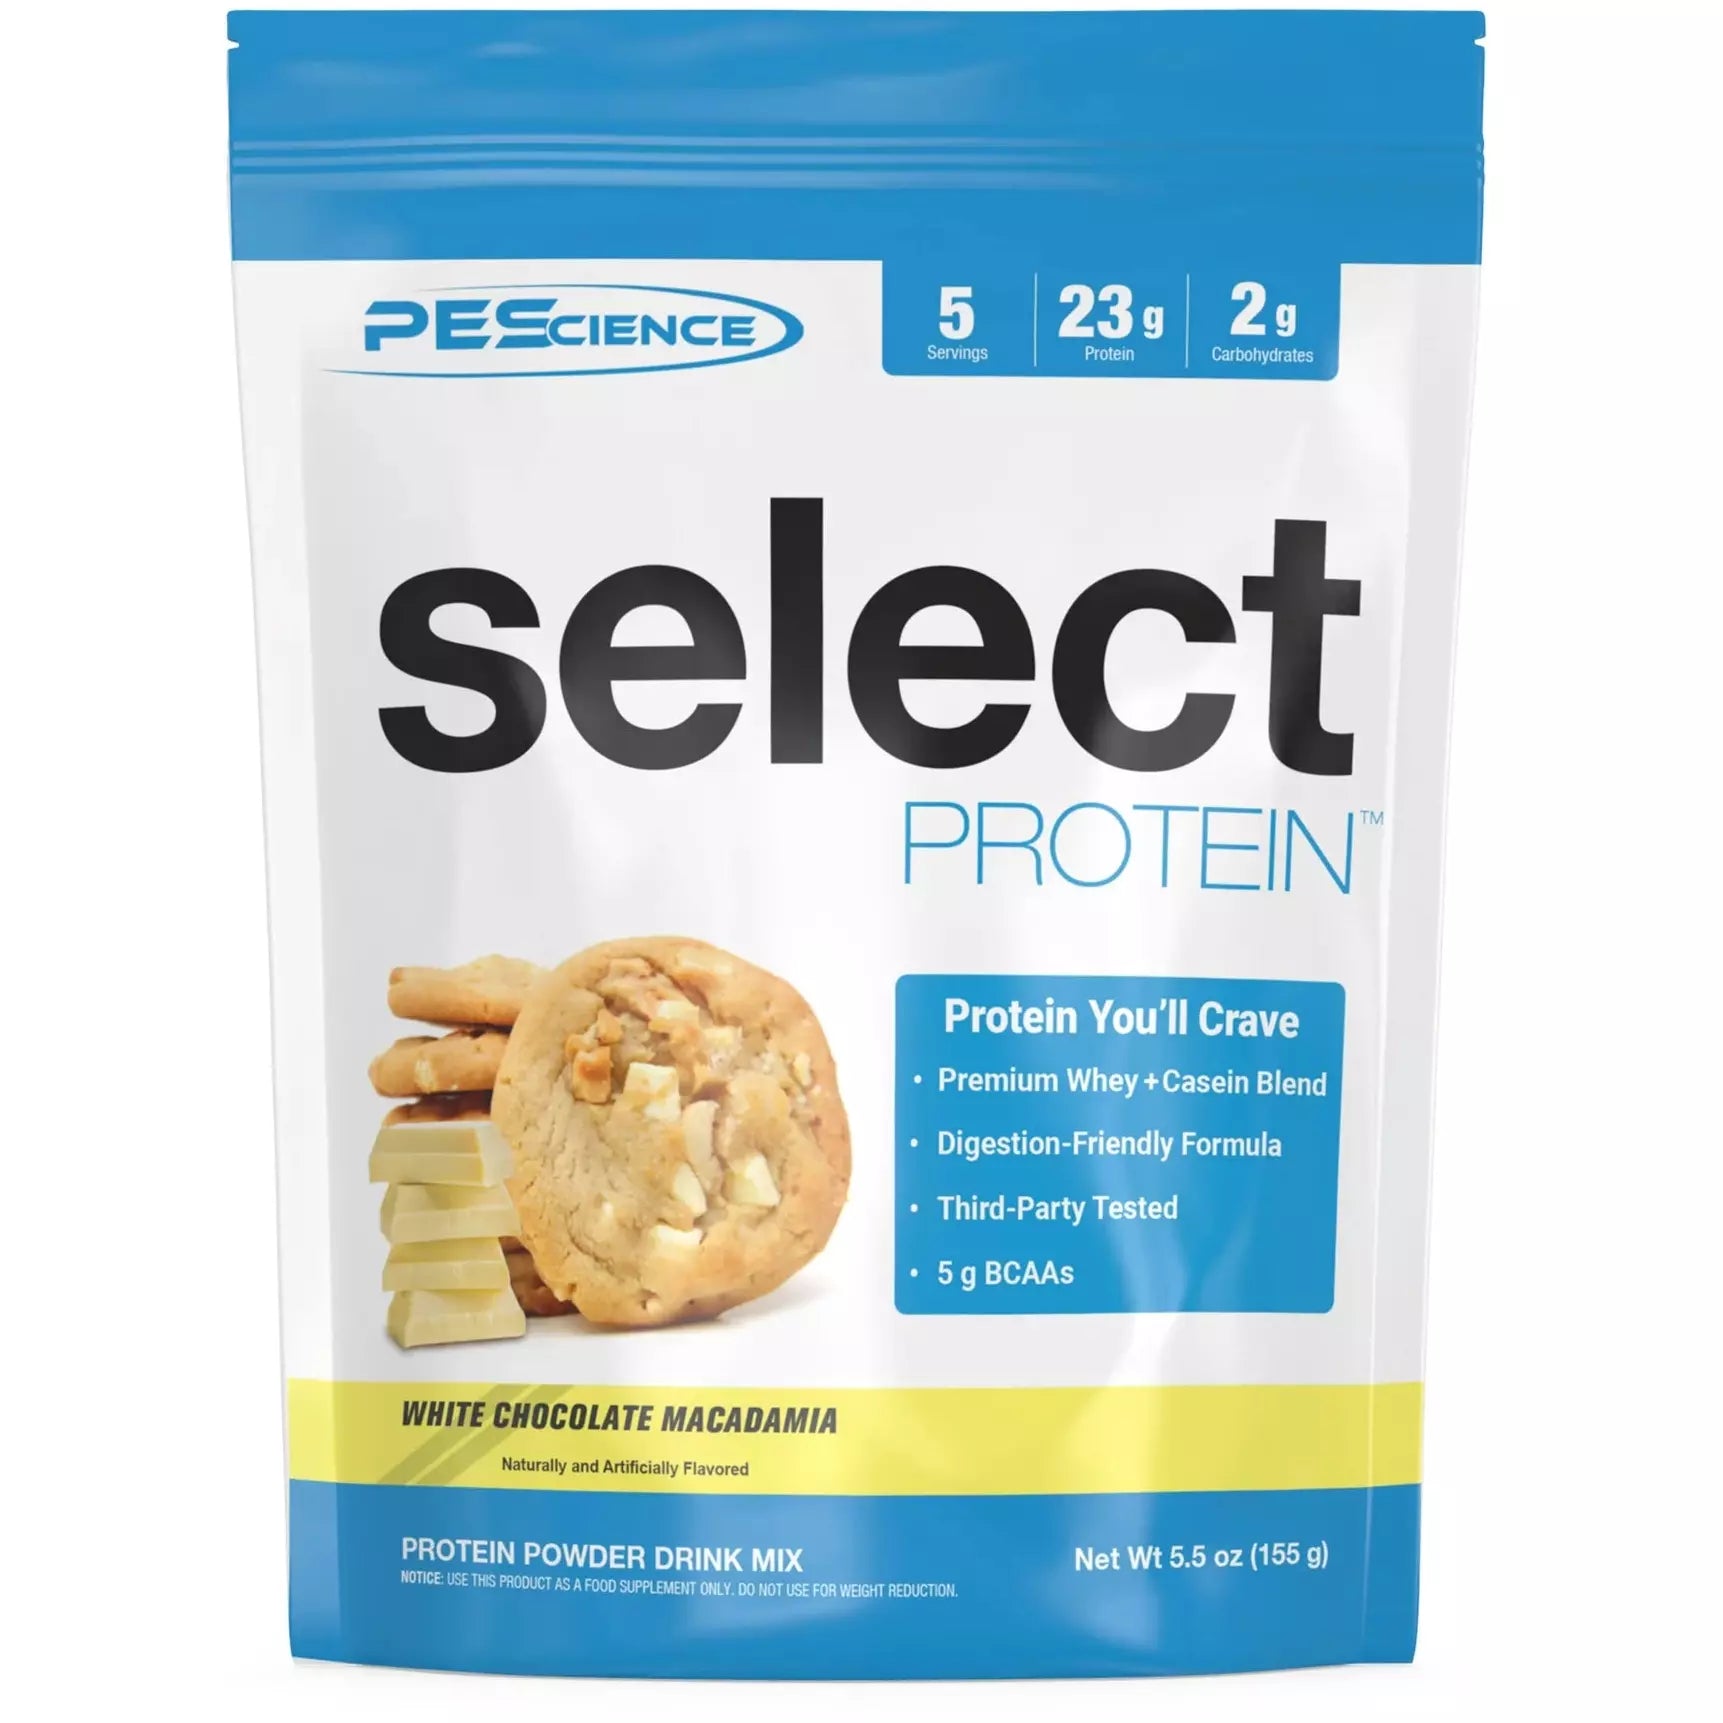 PEScience Select Protein TRIAL SIZE (5 servings) Whey Protein White Chocolate Macadamia PEScience pescience-select-protein-trial-size-5-servings